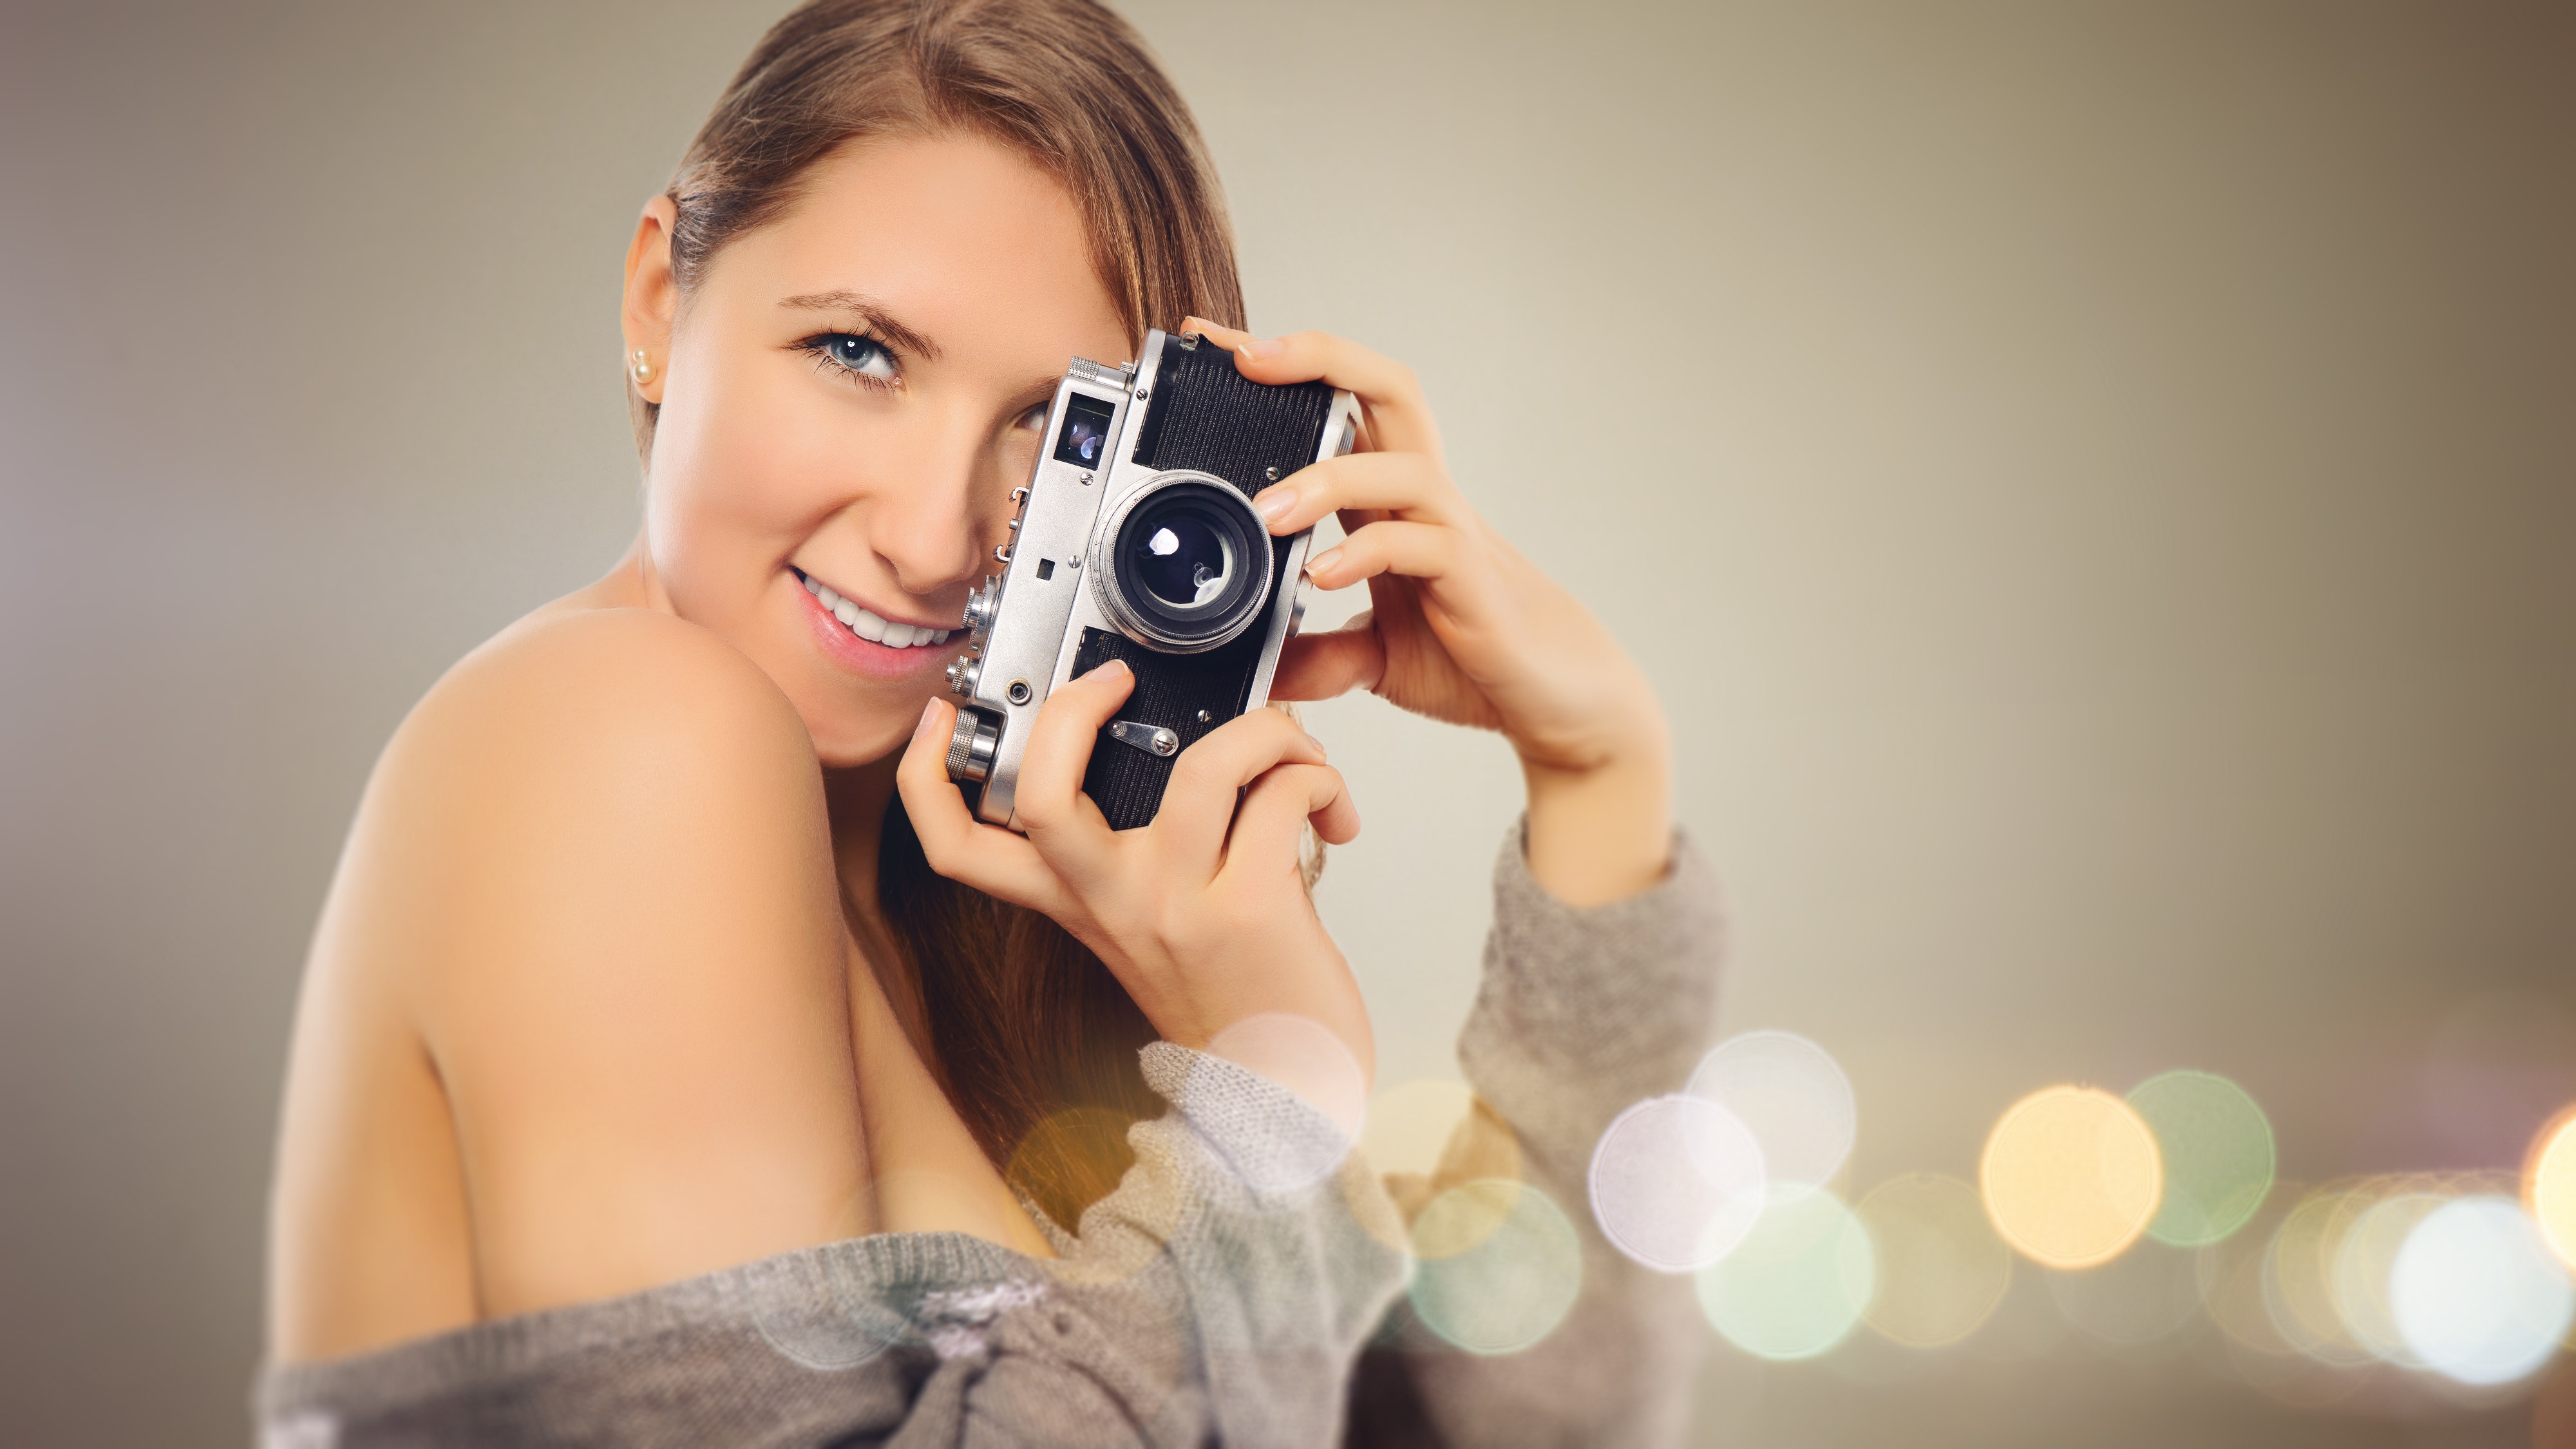 Woman with gray dress holding camera photo